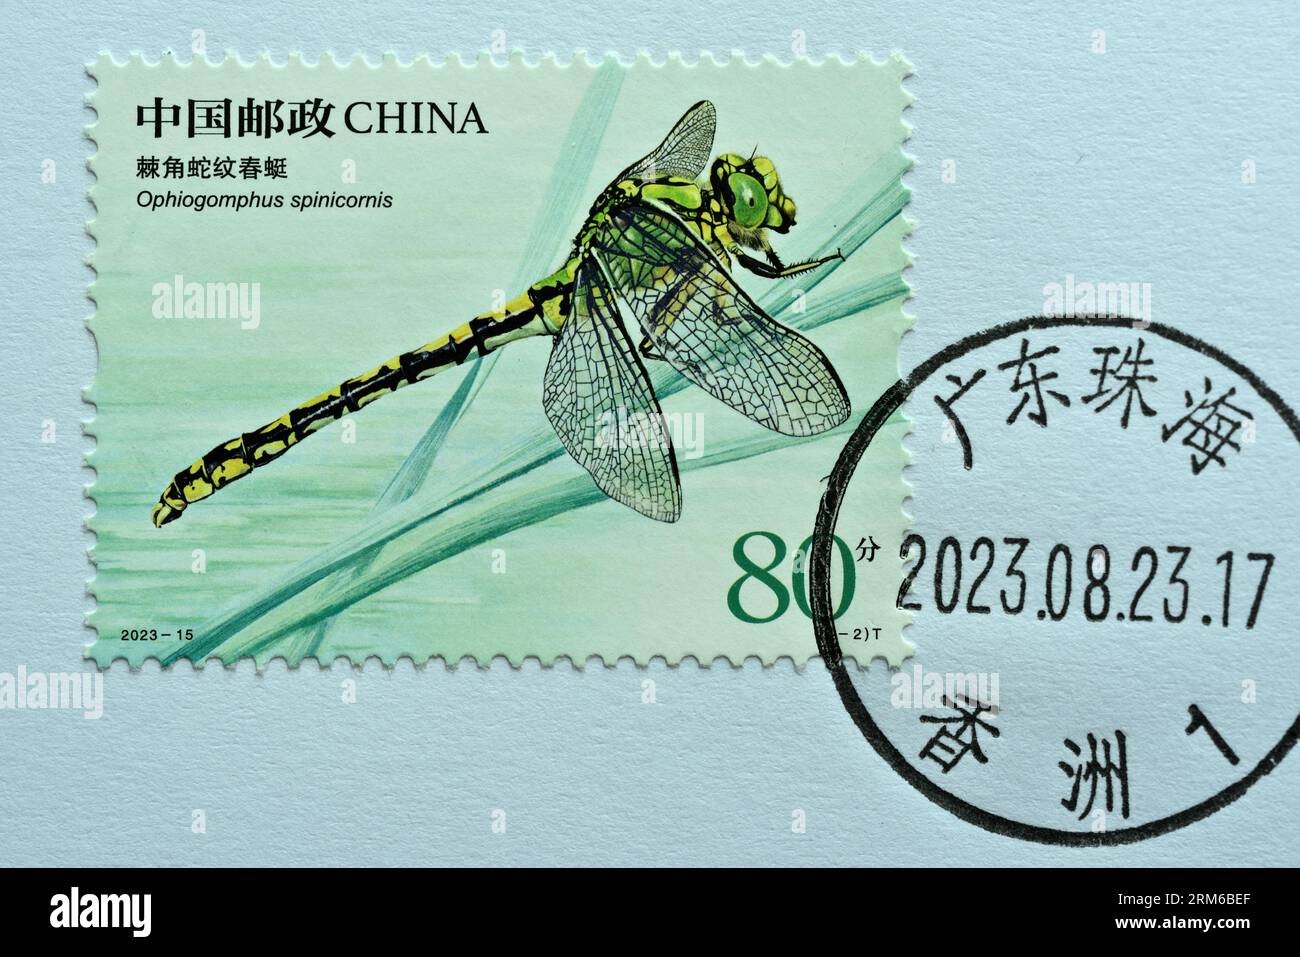 CHINA - CIRCA 2023: A stamps printed in China shows 2023-15 insect Ophiogomphus spinicornis,  circa 2023. Stock Photo